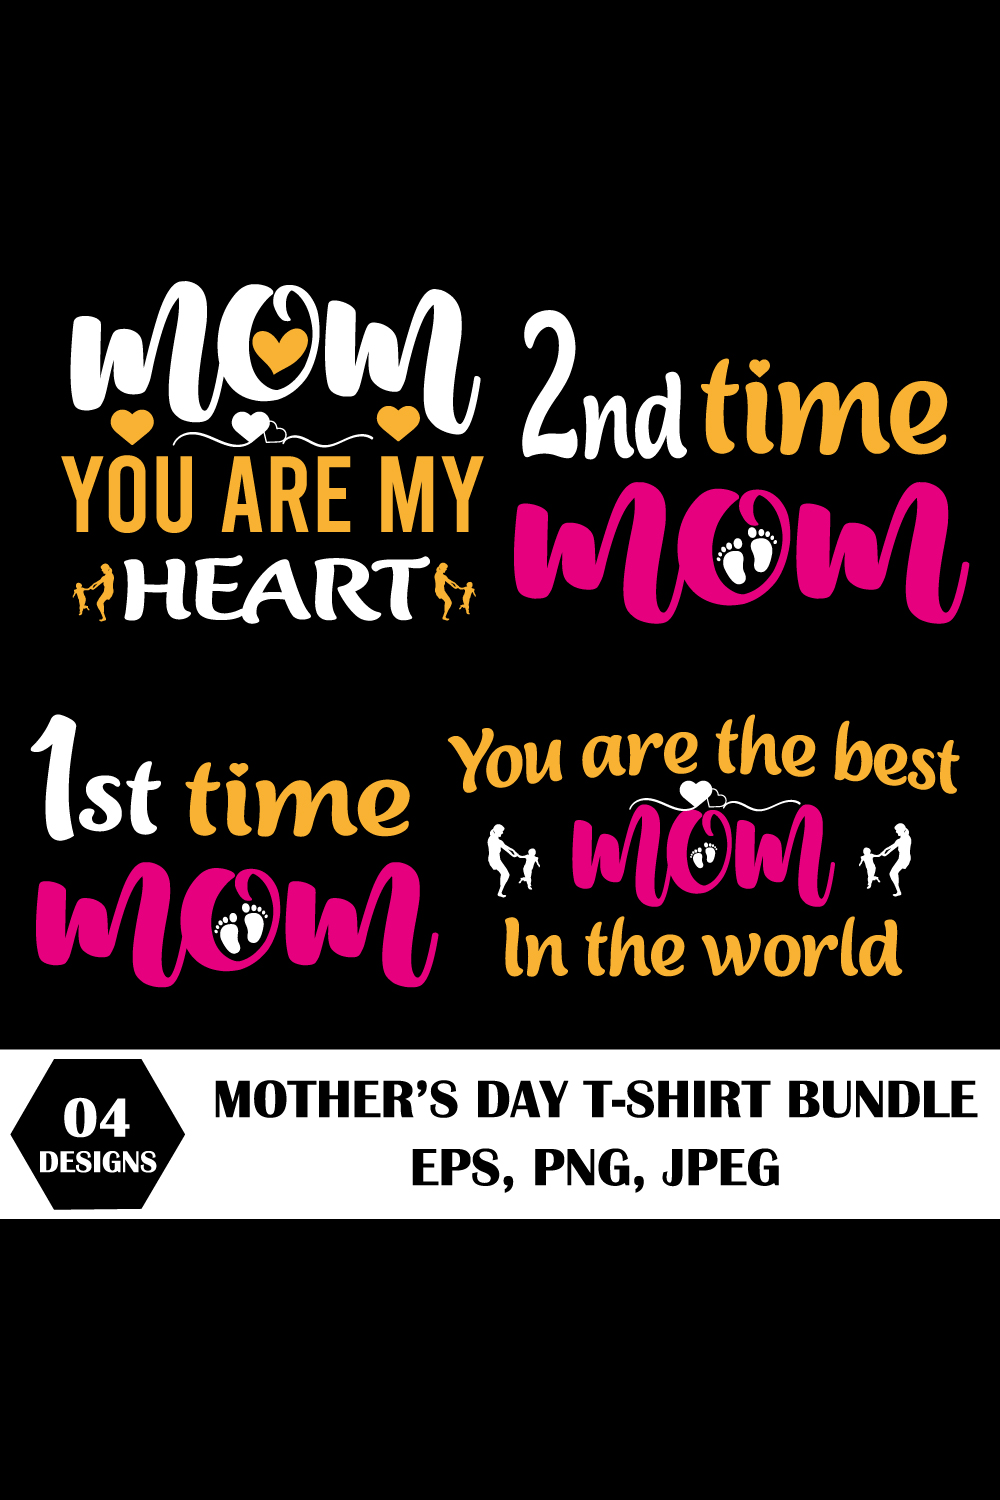 Mother's day t-shirt bundle pinterest preview image.